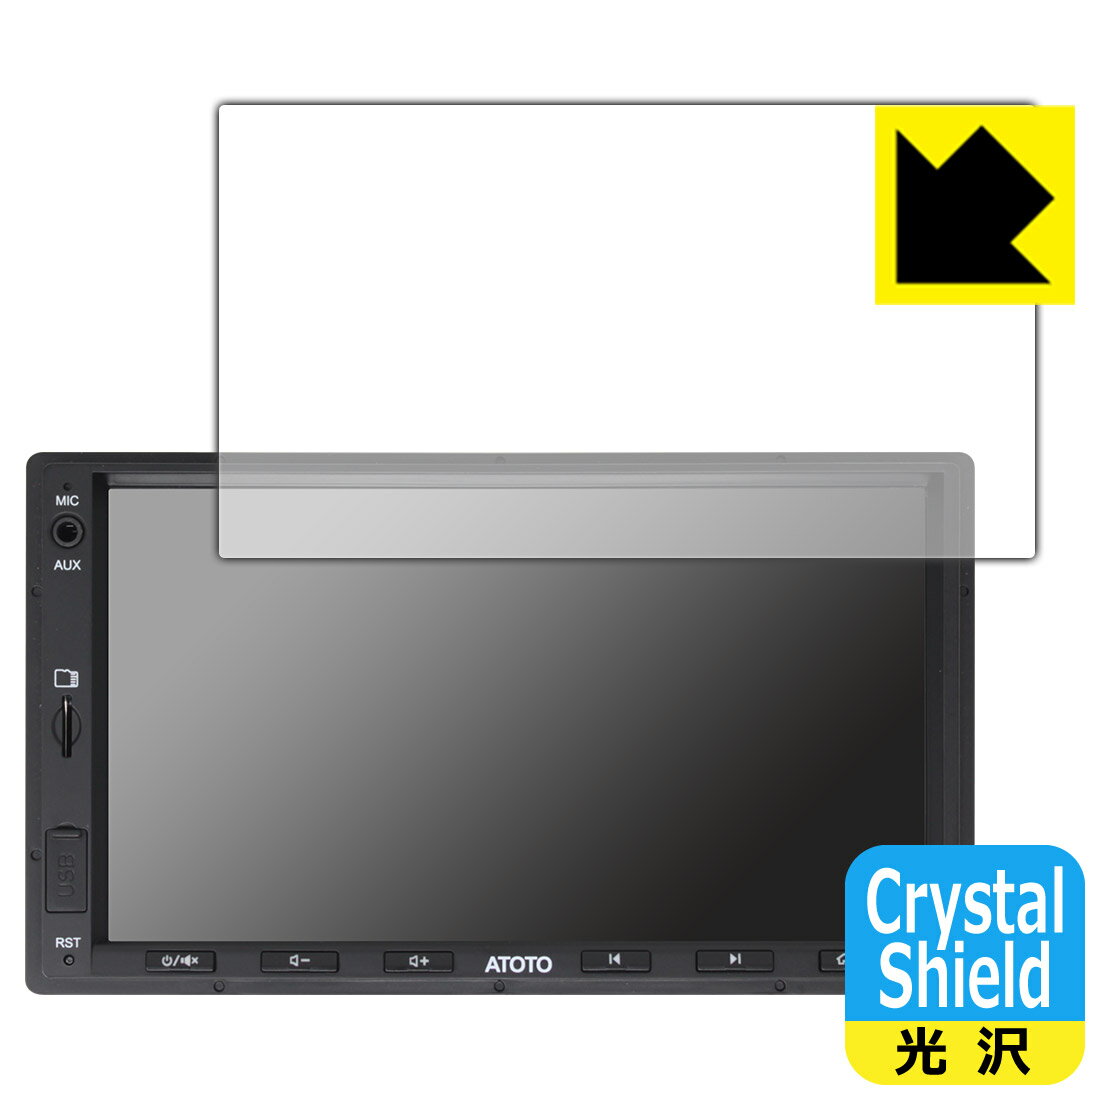 Crystal ShieldyzیtB ATOTO S8 Standard (Gen 2) S8G2A74SD { А